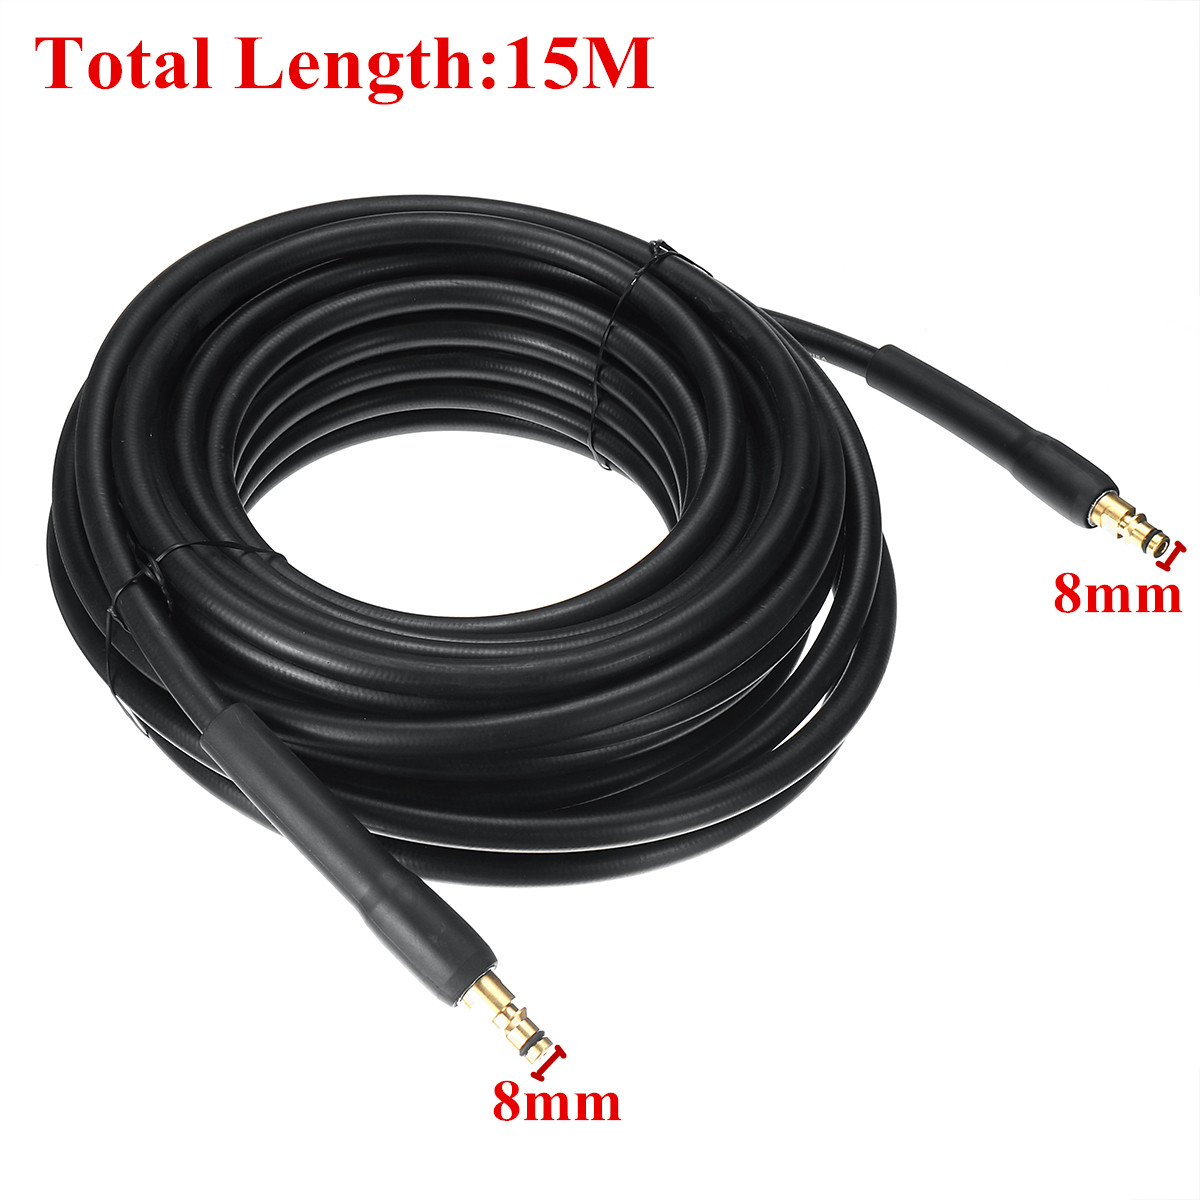 15M-Click-Head-High-Pressure-Washer-Hose-Car-Washer-Water-Cleaning-Hose-for-Karcher-K-Series-1563245-2